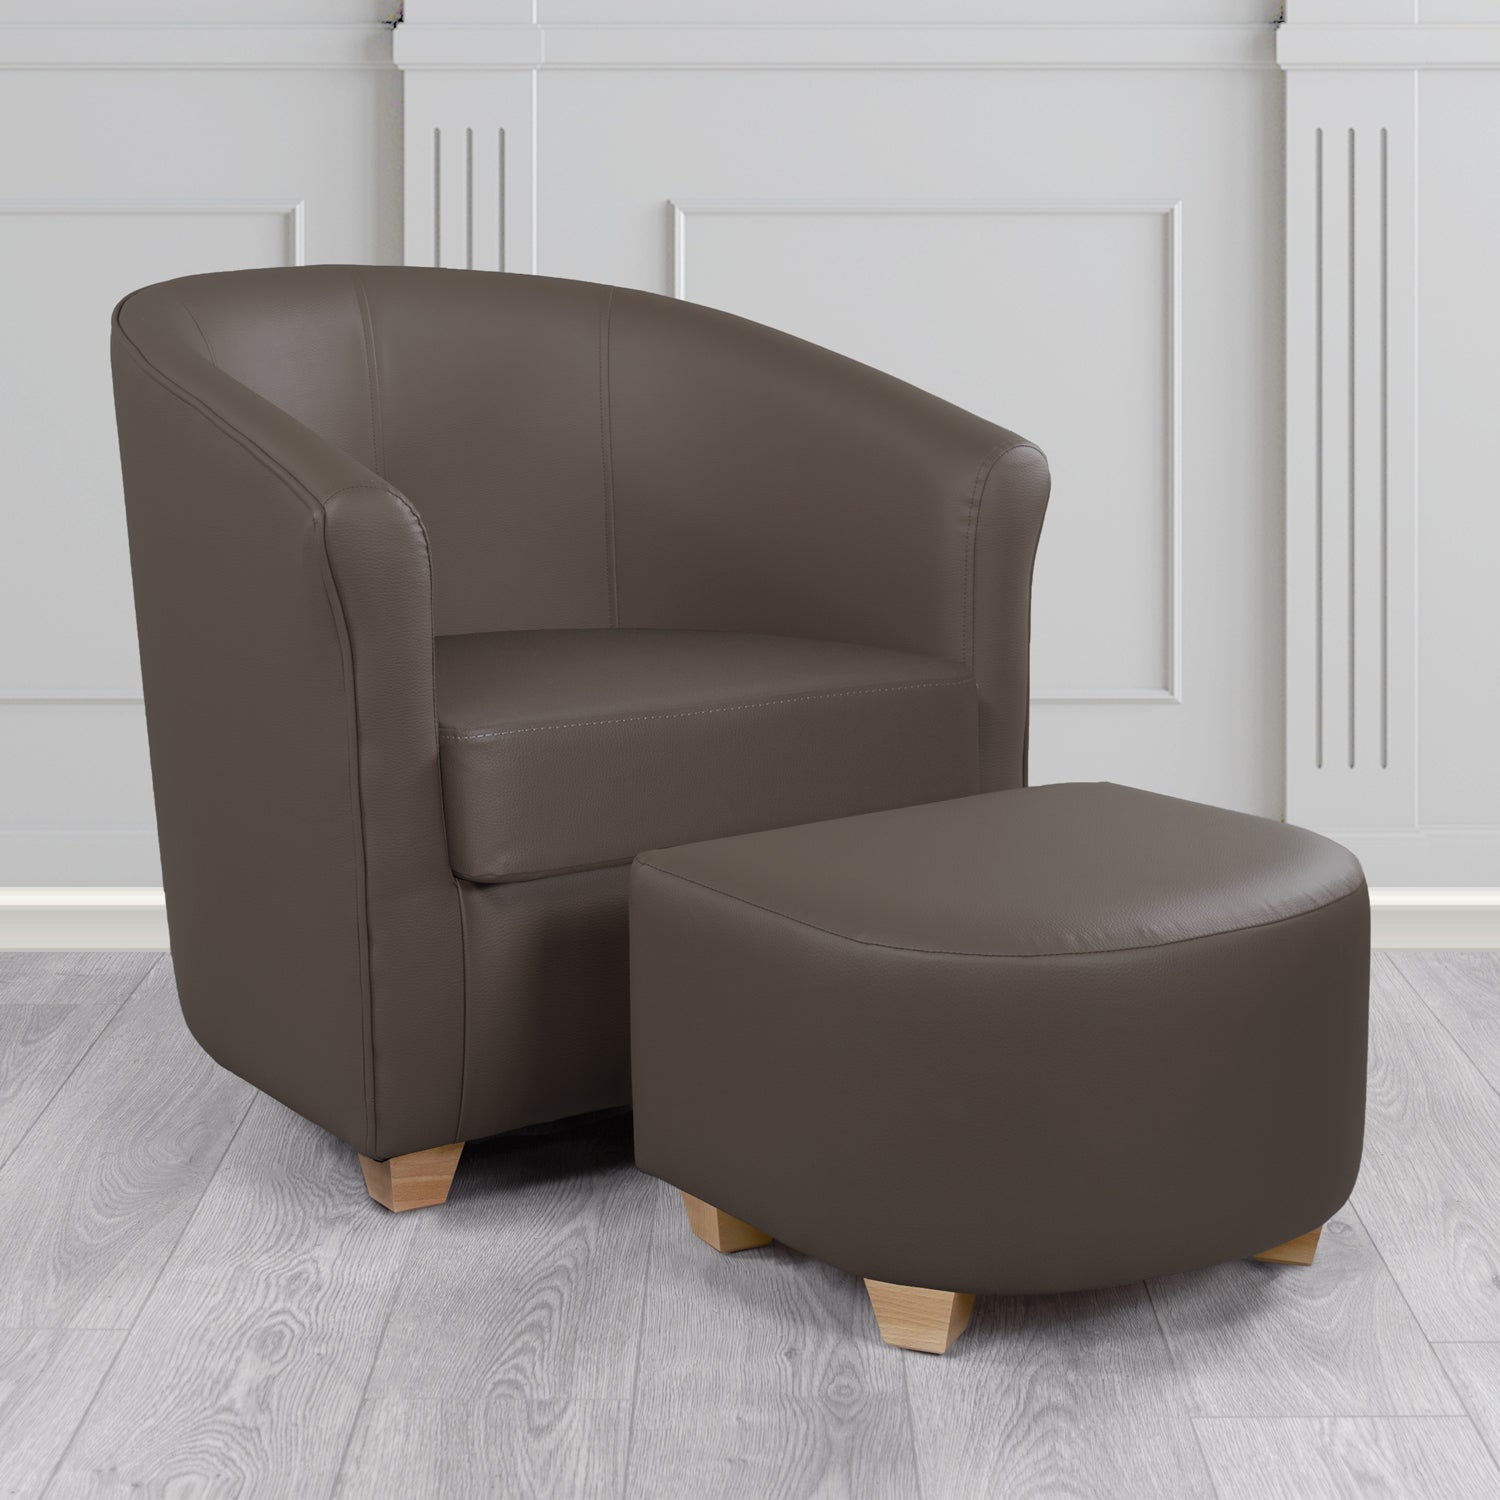 Cannes Tub Chair with Footstool Set in Madrid Chocolate Faux Leather - The Tub Chair Shop